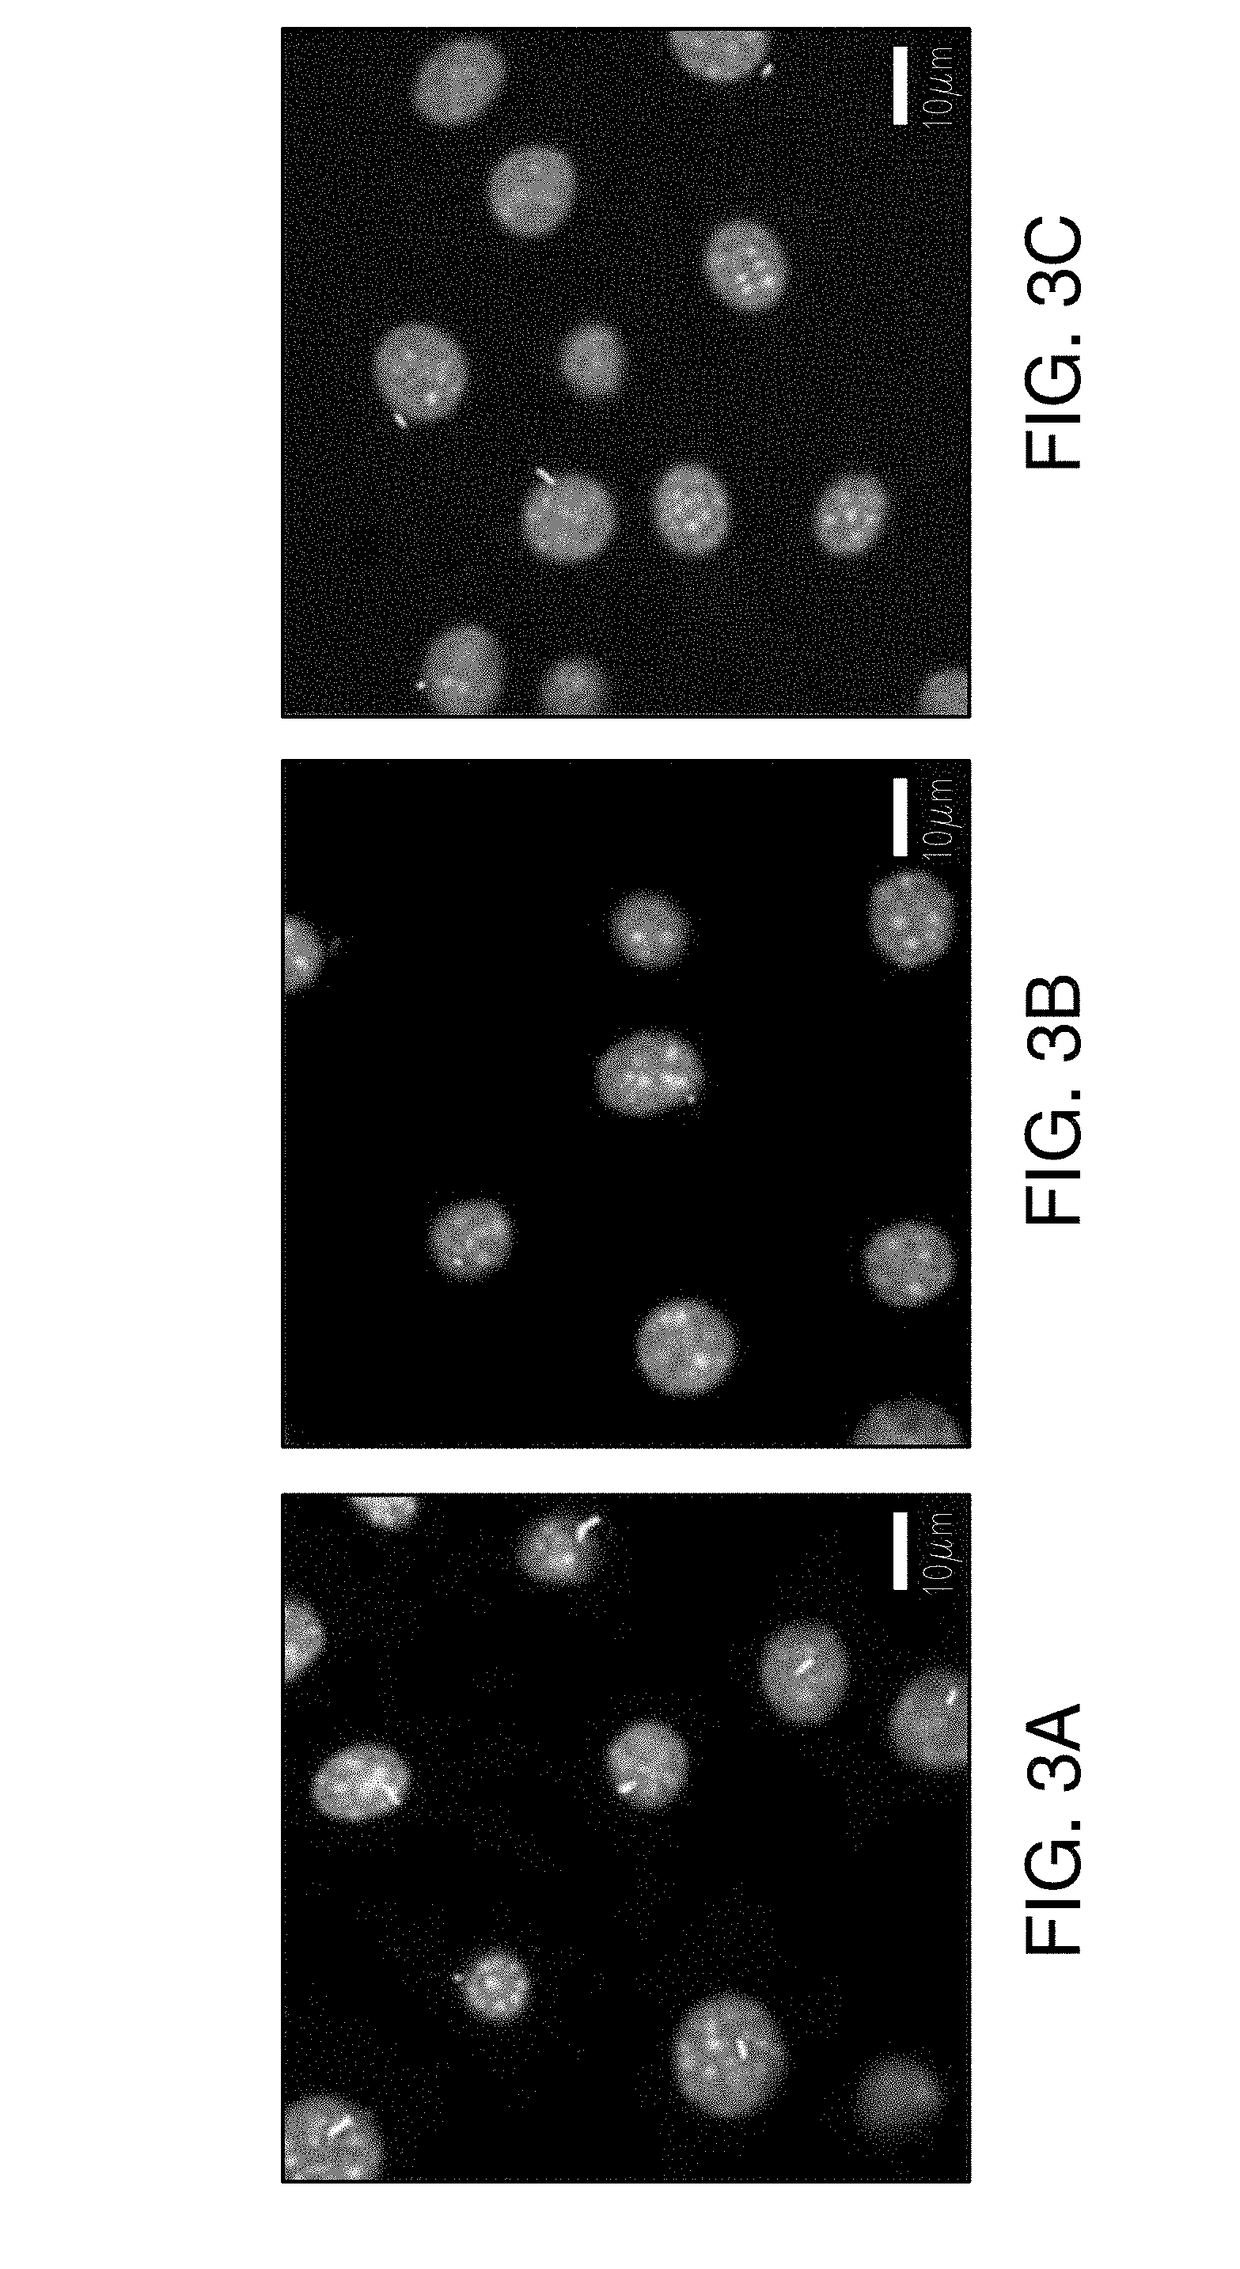 Regulation of gene expression by modulating primary cilia length